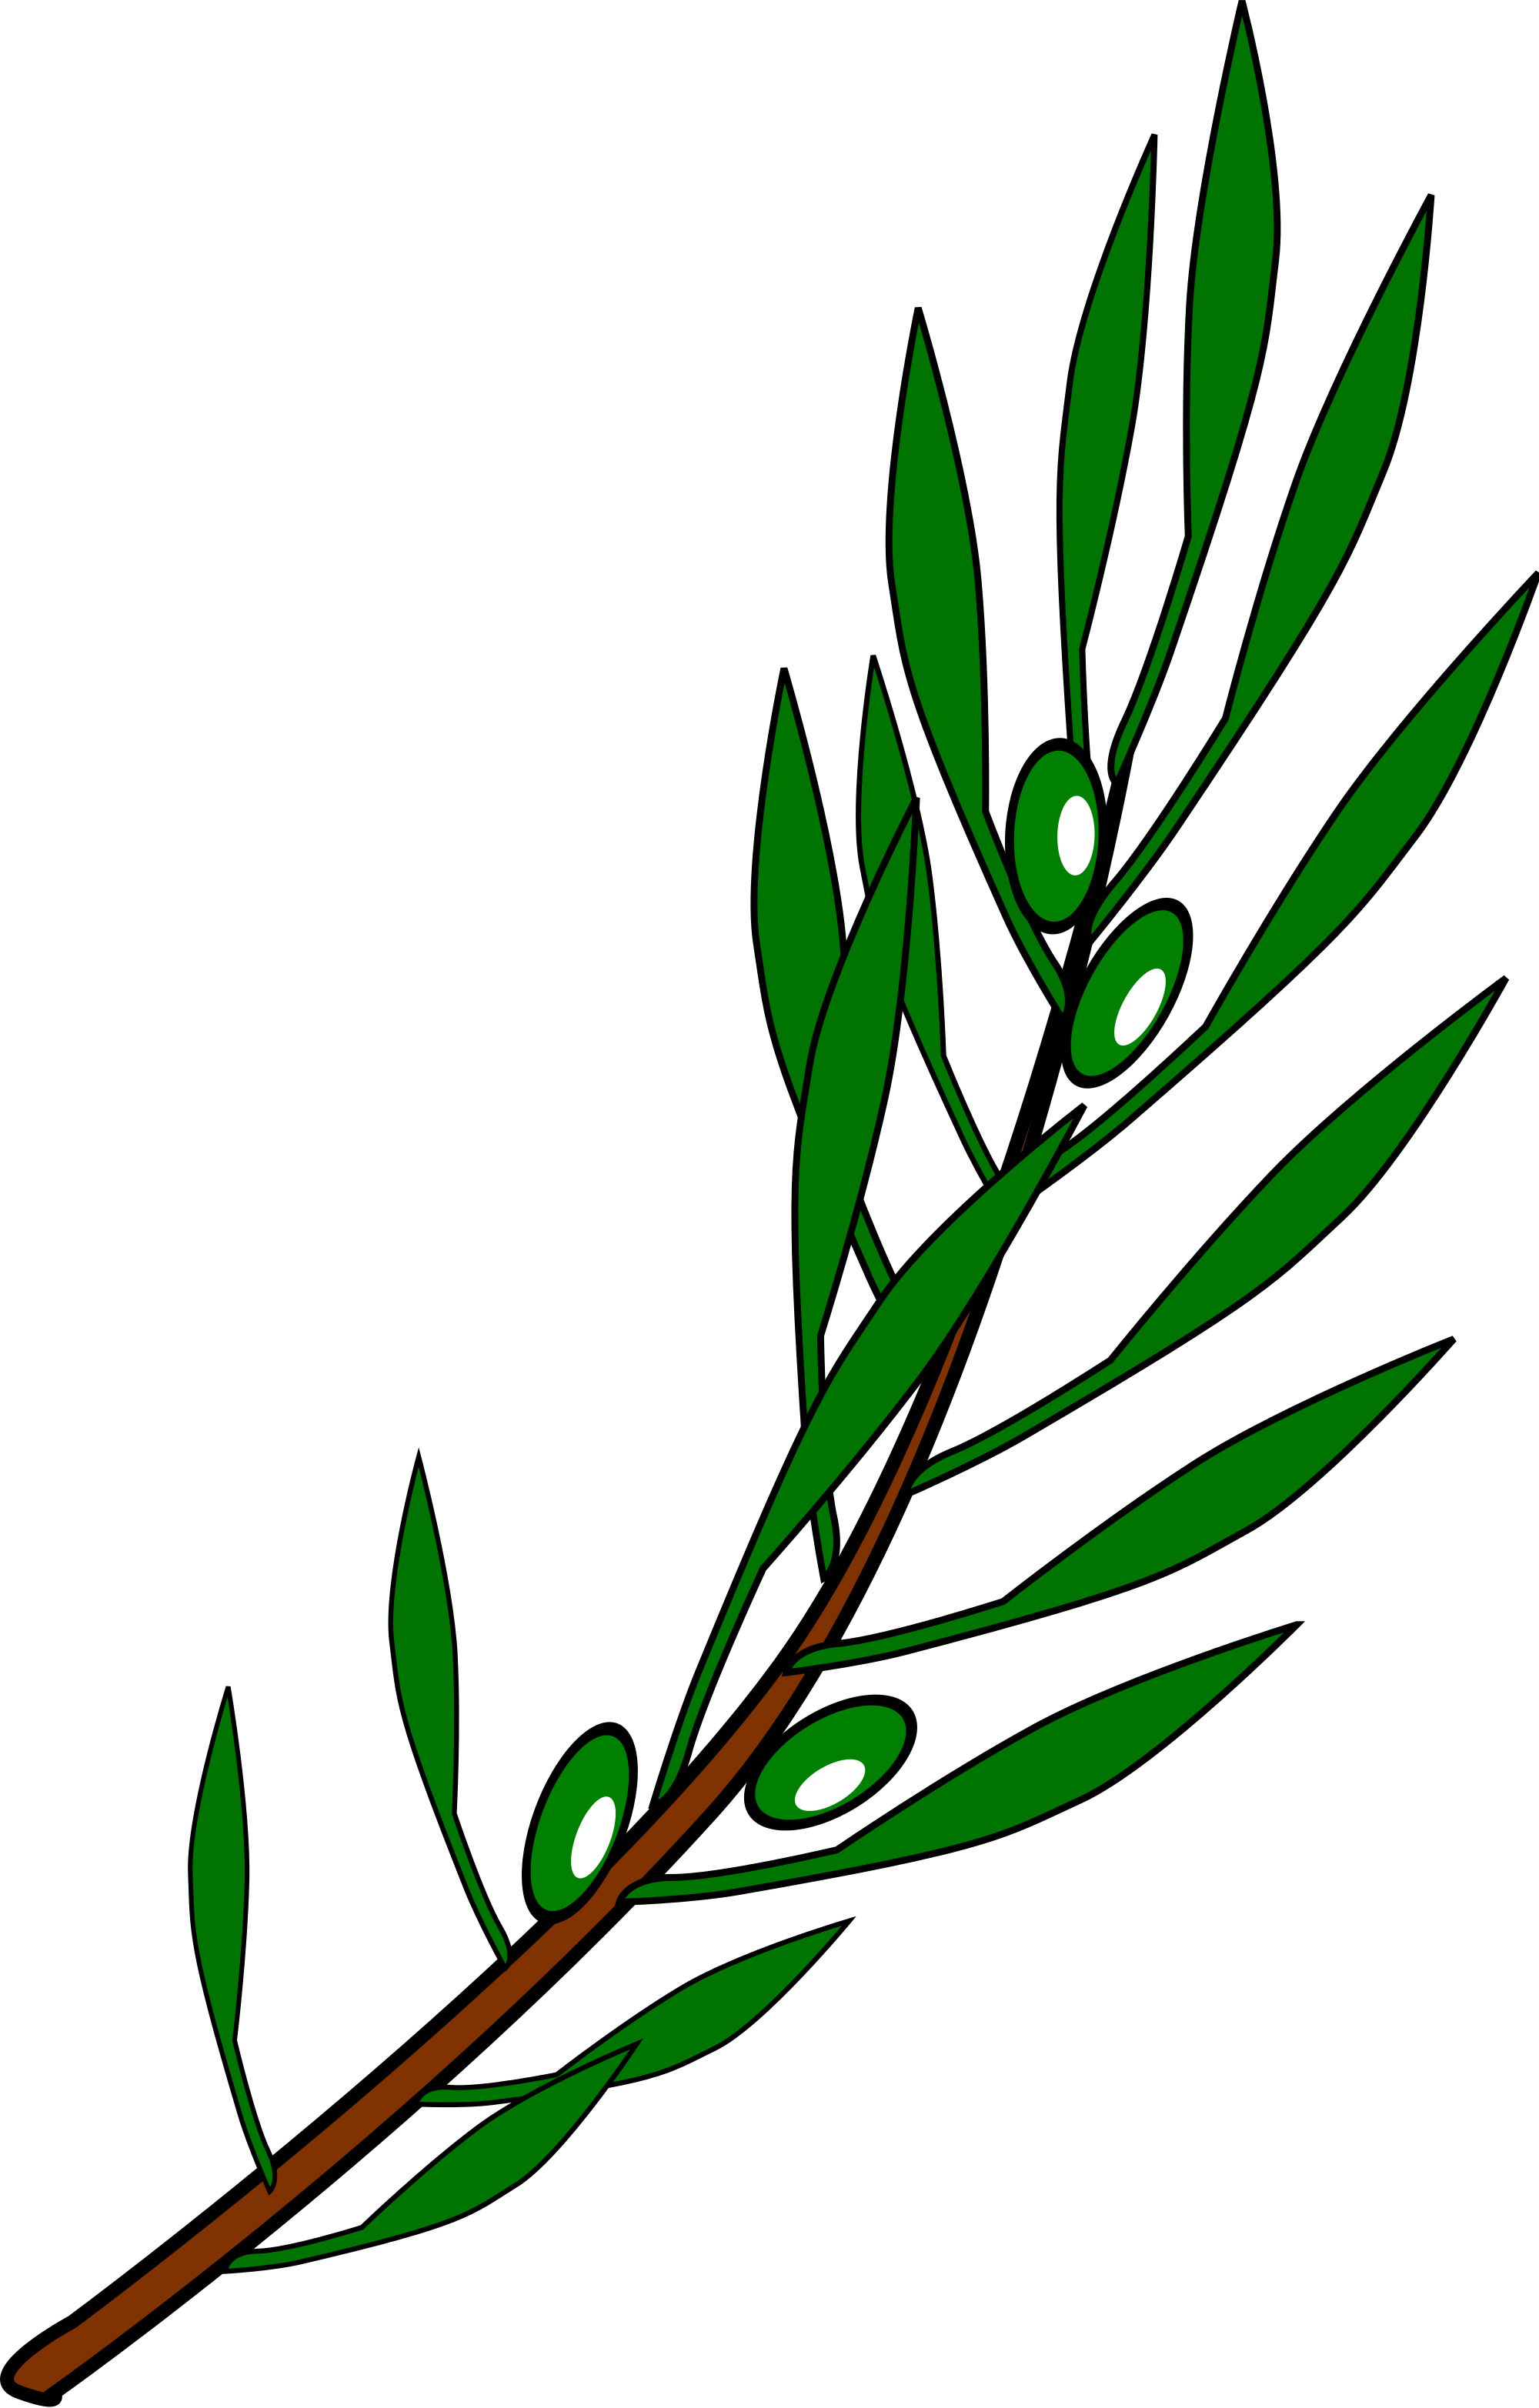 Fileolive Branch Drawing - Draw A Olive Branch (2000x3130)